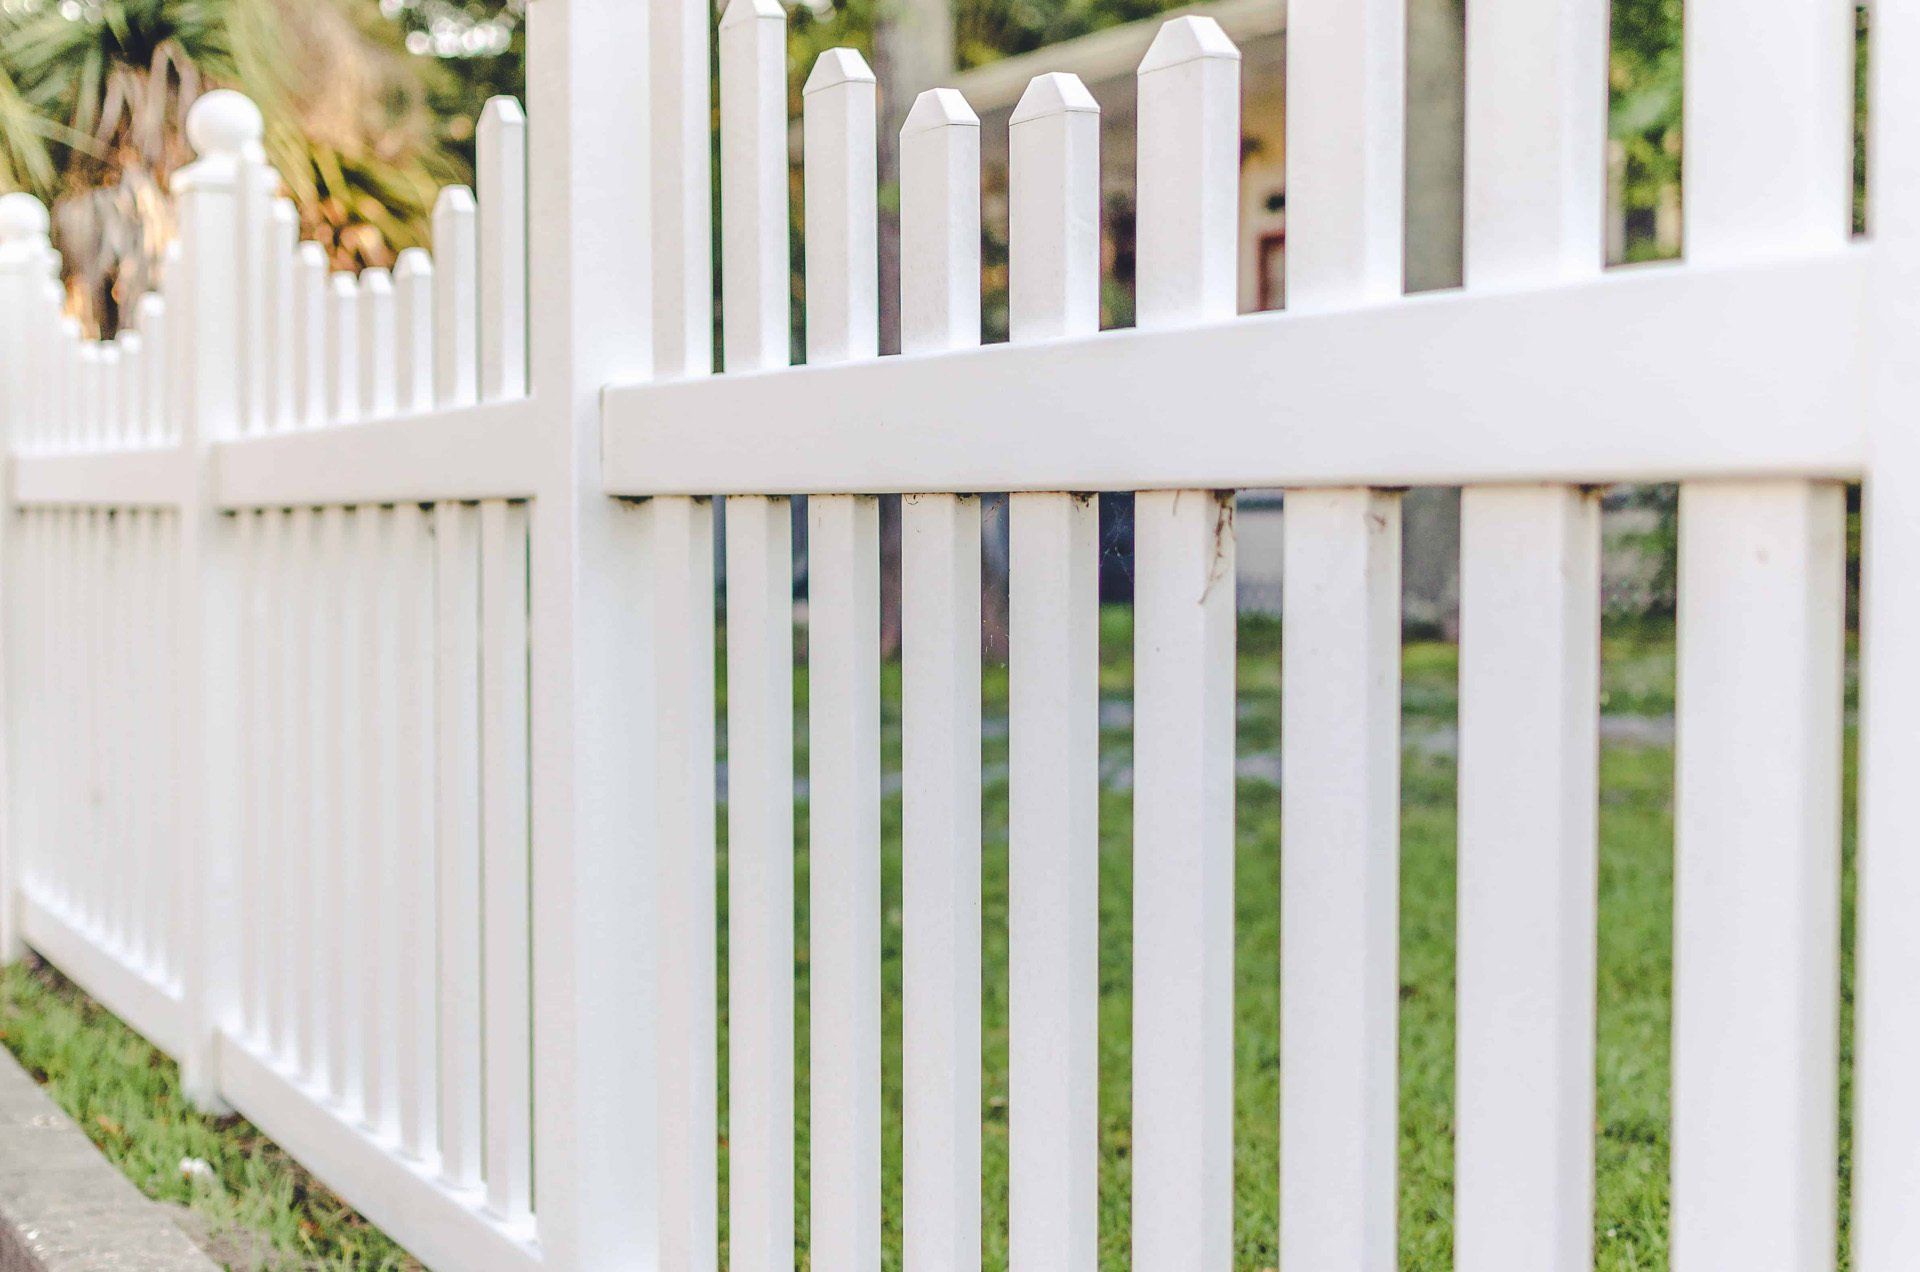 Aluminum fence is a long lasting fencing material